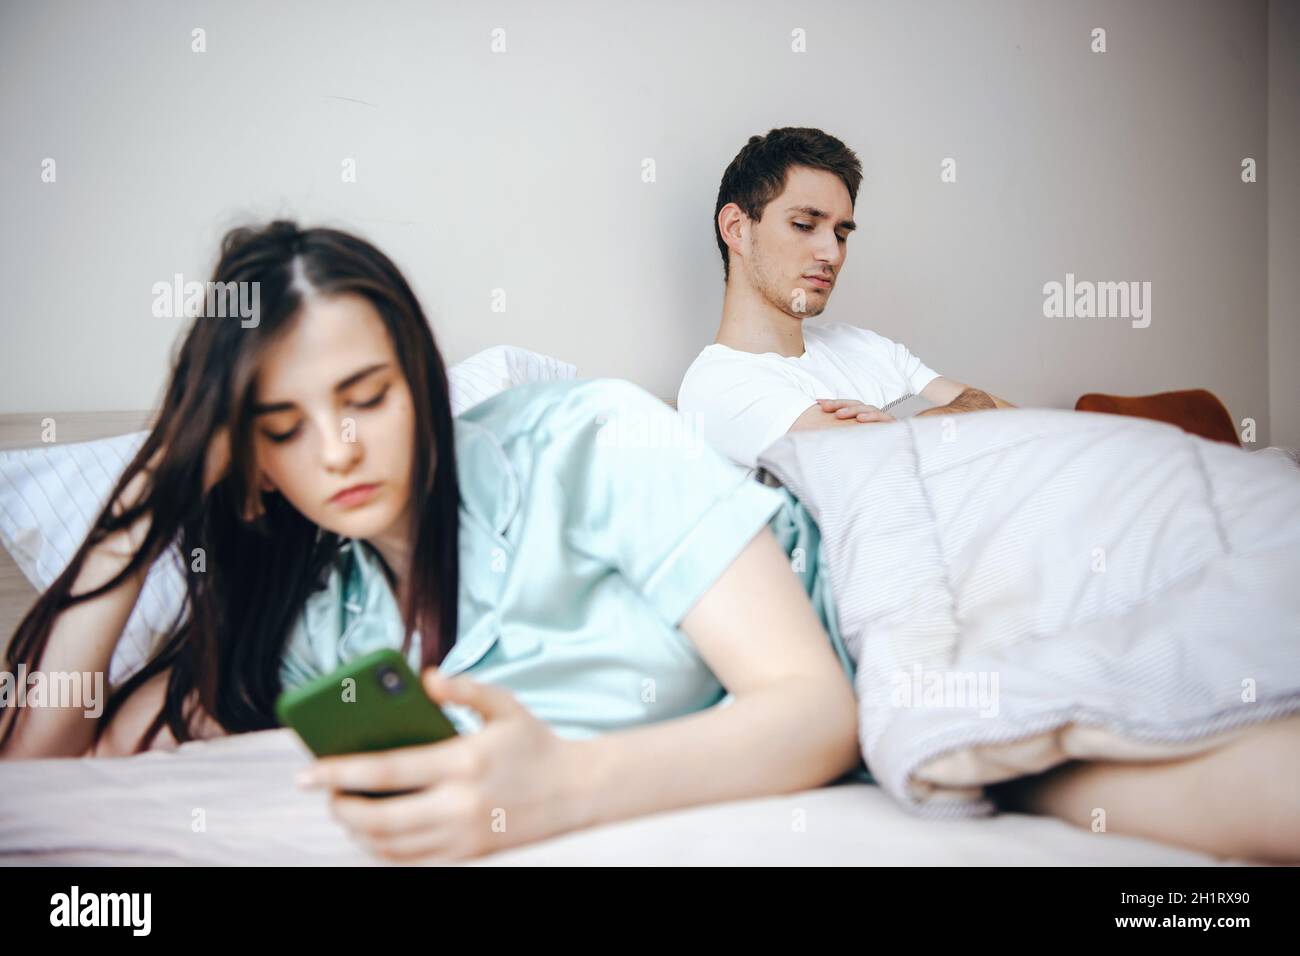 Couple sitting in bed arguing and now they are upset with each other, the woman having turned her back on the man writing messages on the phone Stock Photo